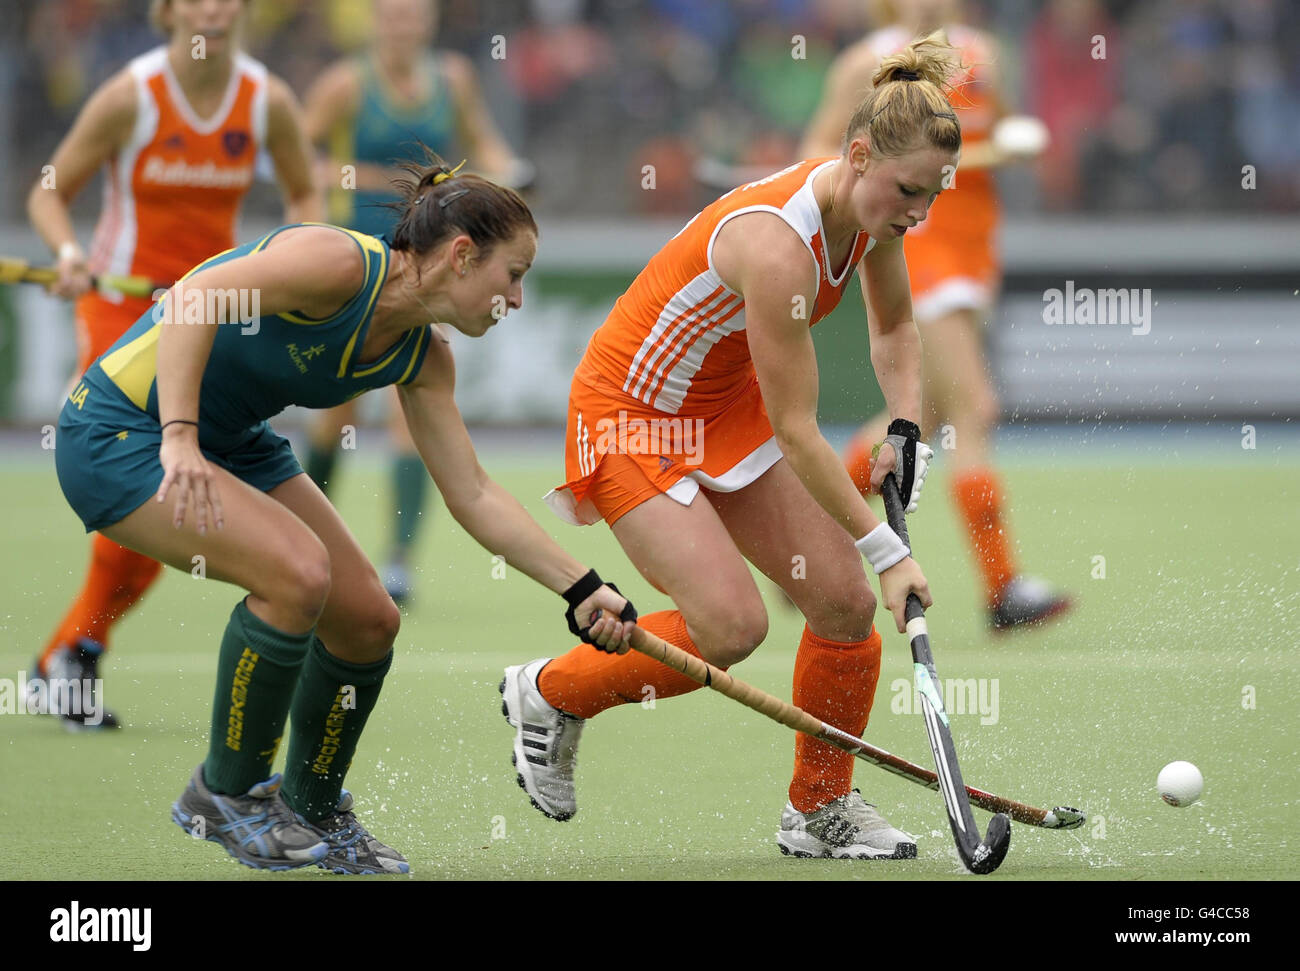 Netherland's Claire Verhage (right) is challenged by Australia's Jayde Taylor during the Rabo FIH Women's Champions Trophy match at the Wagener Stadium, Amsterdam Stock Photo